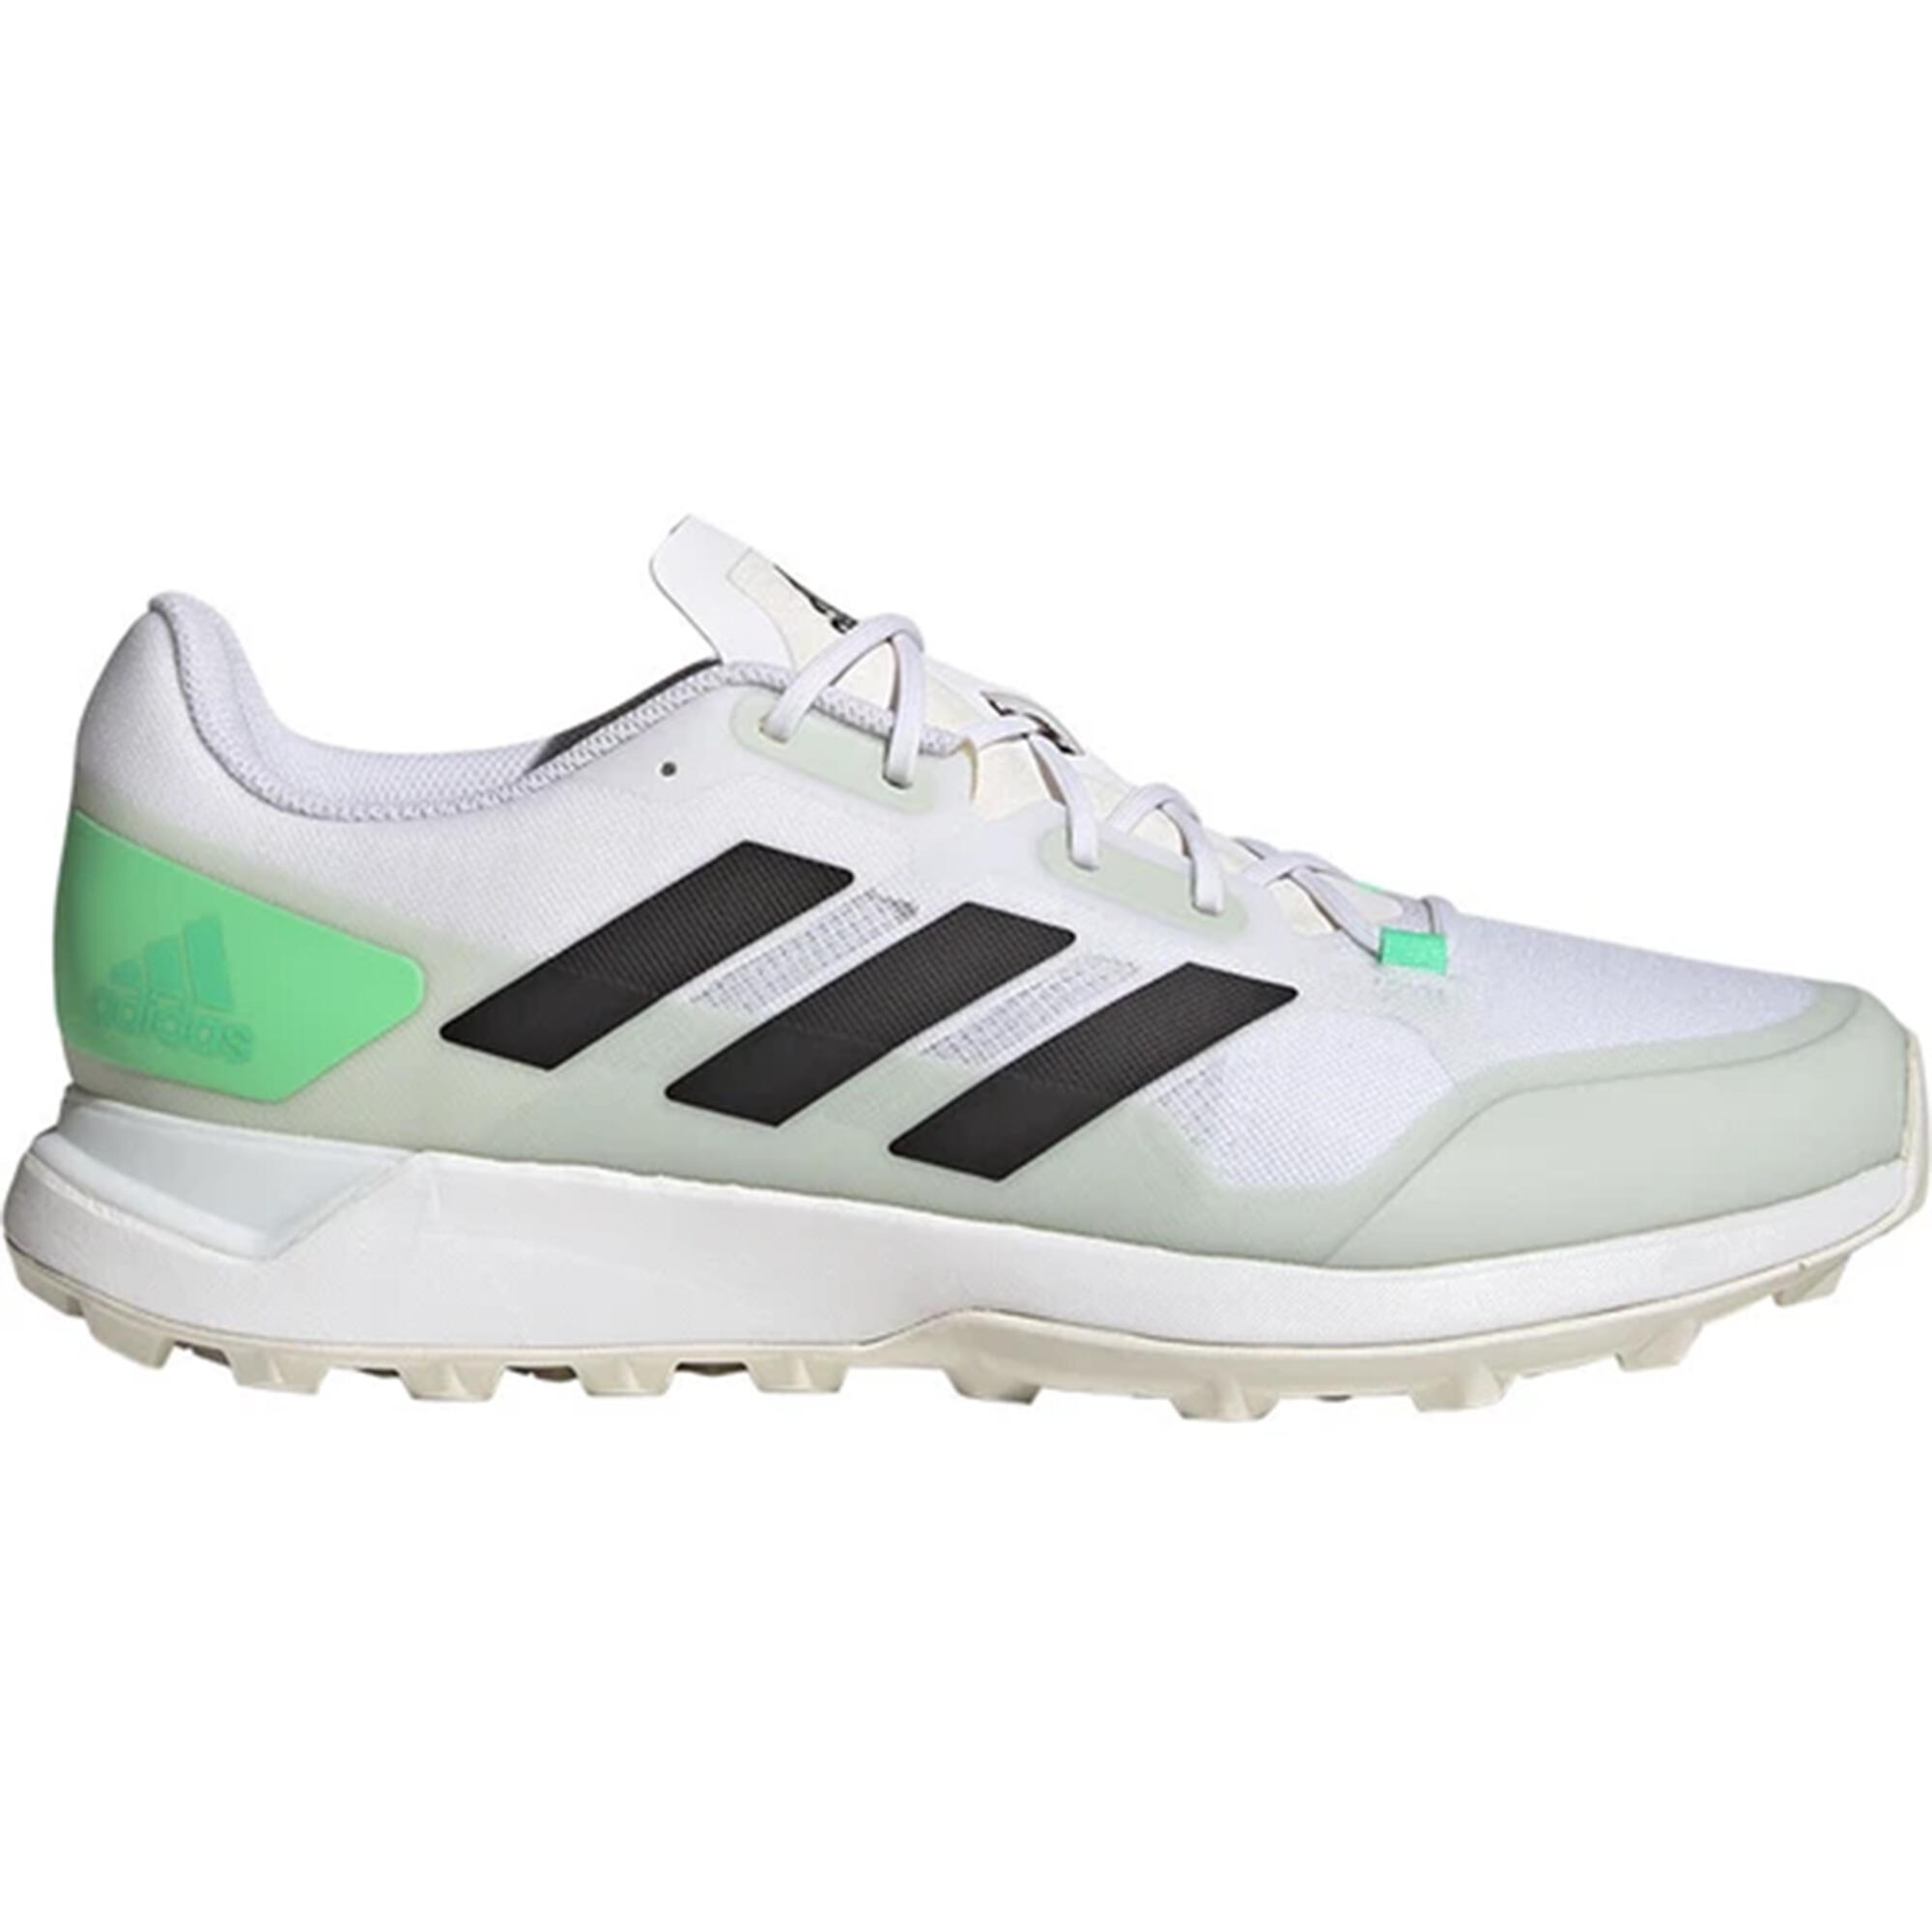 Adidas Adult High-intensity Hockey Shoes Zone Dox 2.0 - White/mint